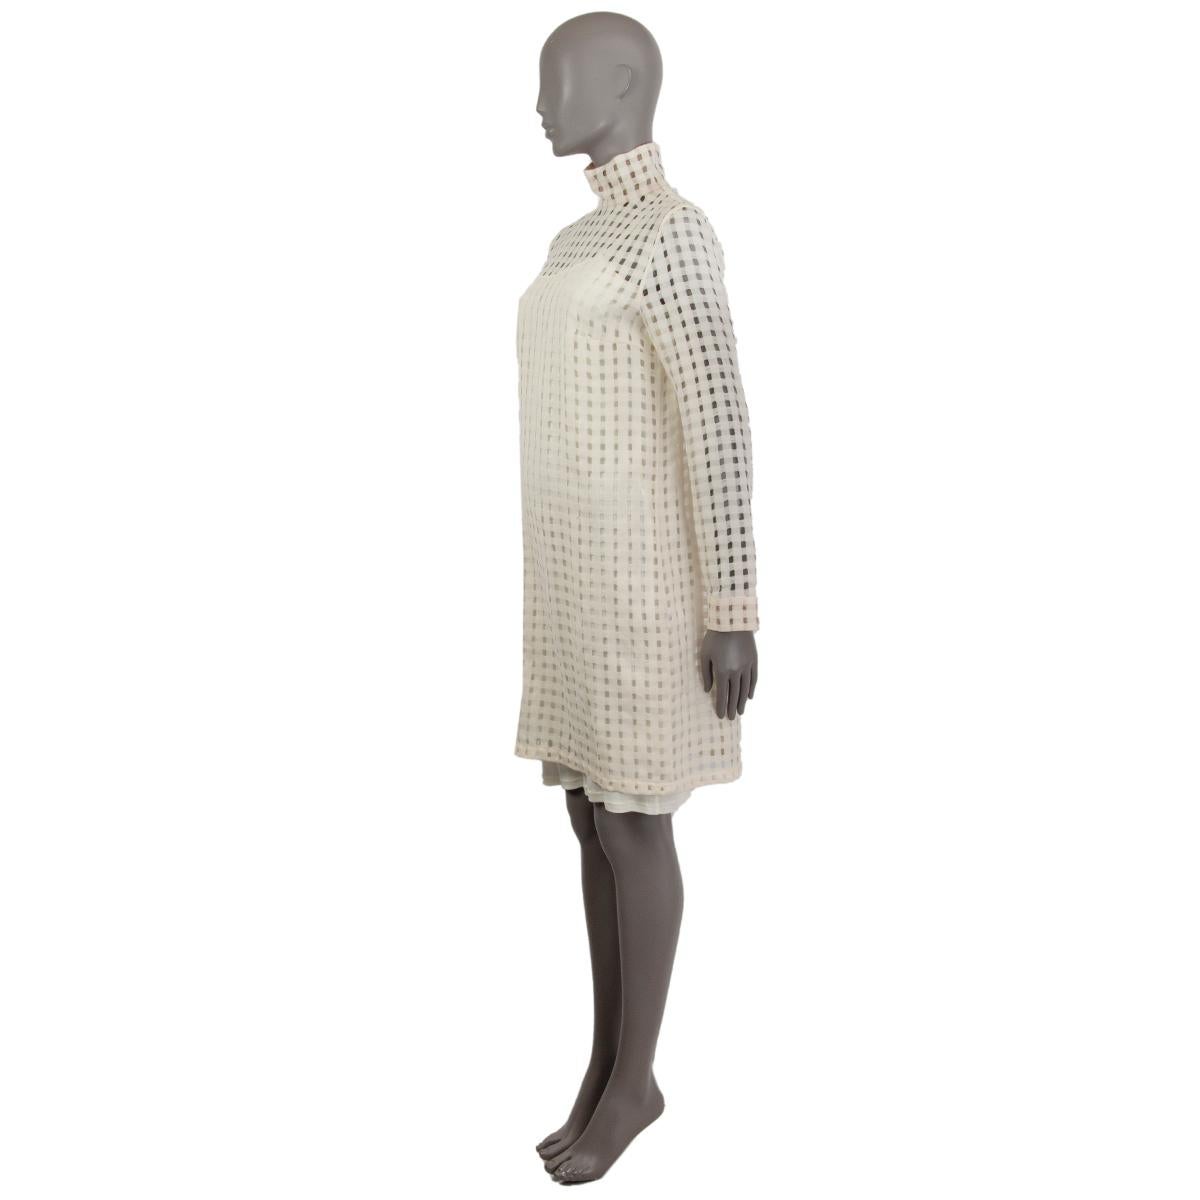 100% authentic Akris lattice-like stand-up collar long-sleeve gauze dress in off-white wool (100%). Opens with a concealed zipper on the back. Comes with slip dress undernetah in off-white viascose (100%). Brand new. 

Measurements
Tag